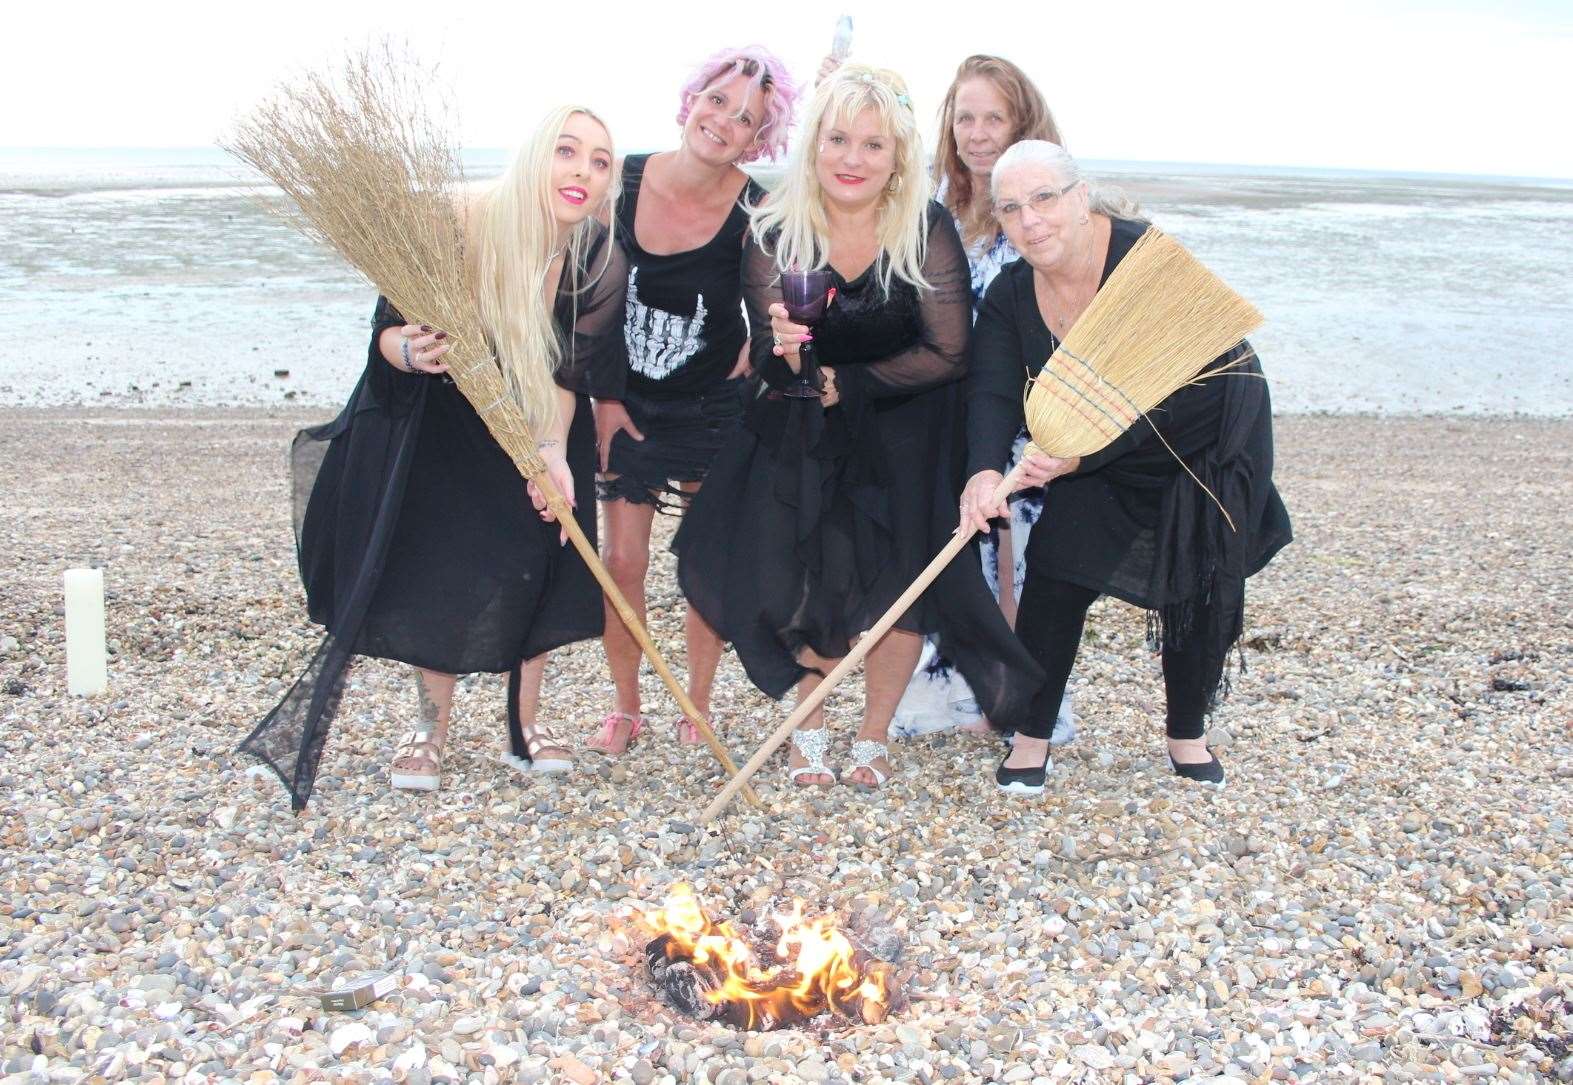 The witches of Sheppey casting spells on the beach at Minster